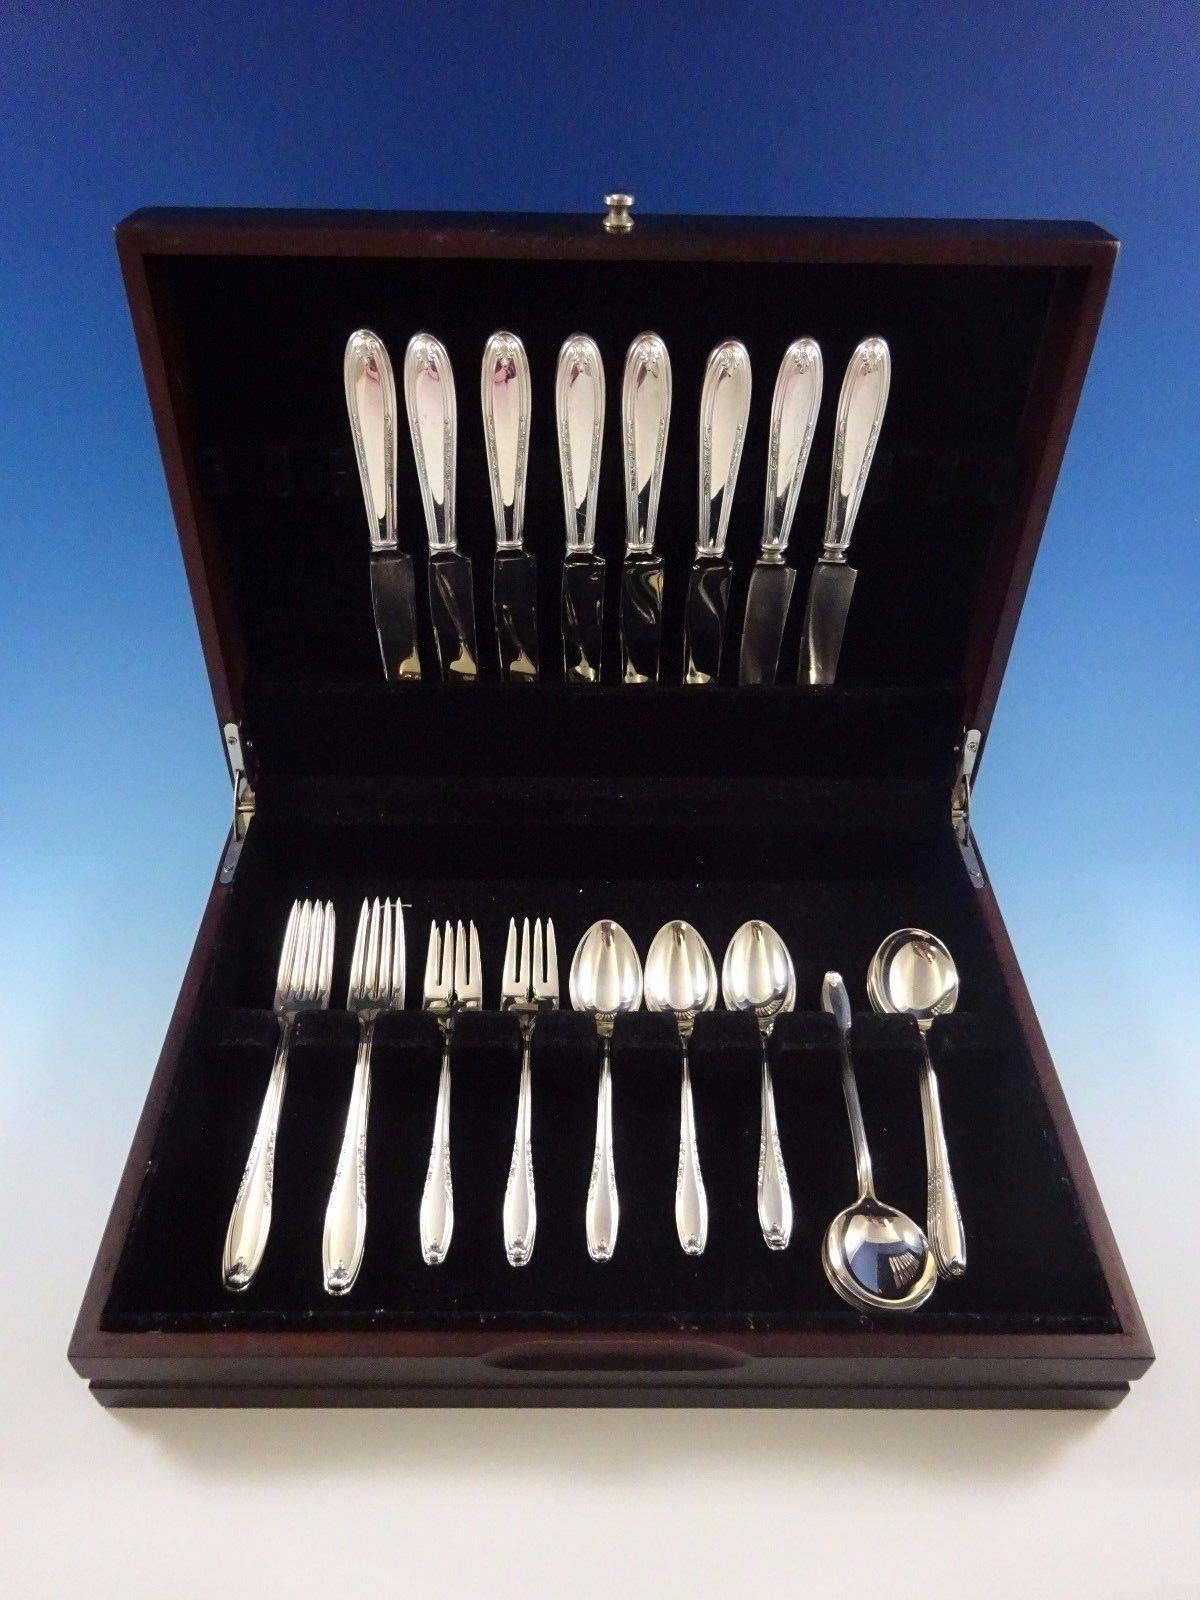 Leonore by Manchester sterling silver flatware set of 40 pieces.

This set includes:

Eight knives, 8 7/8